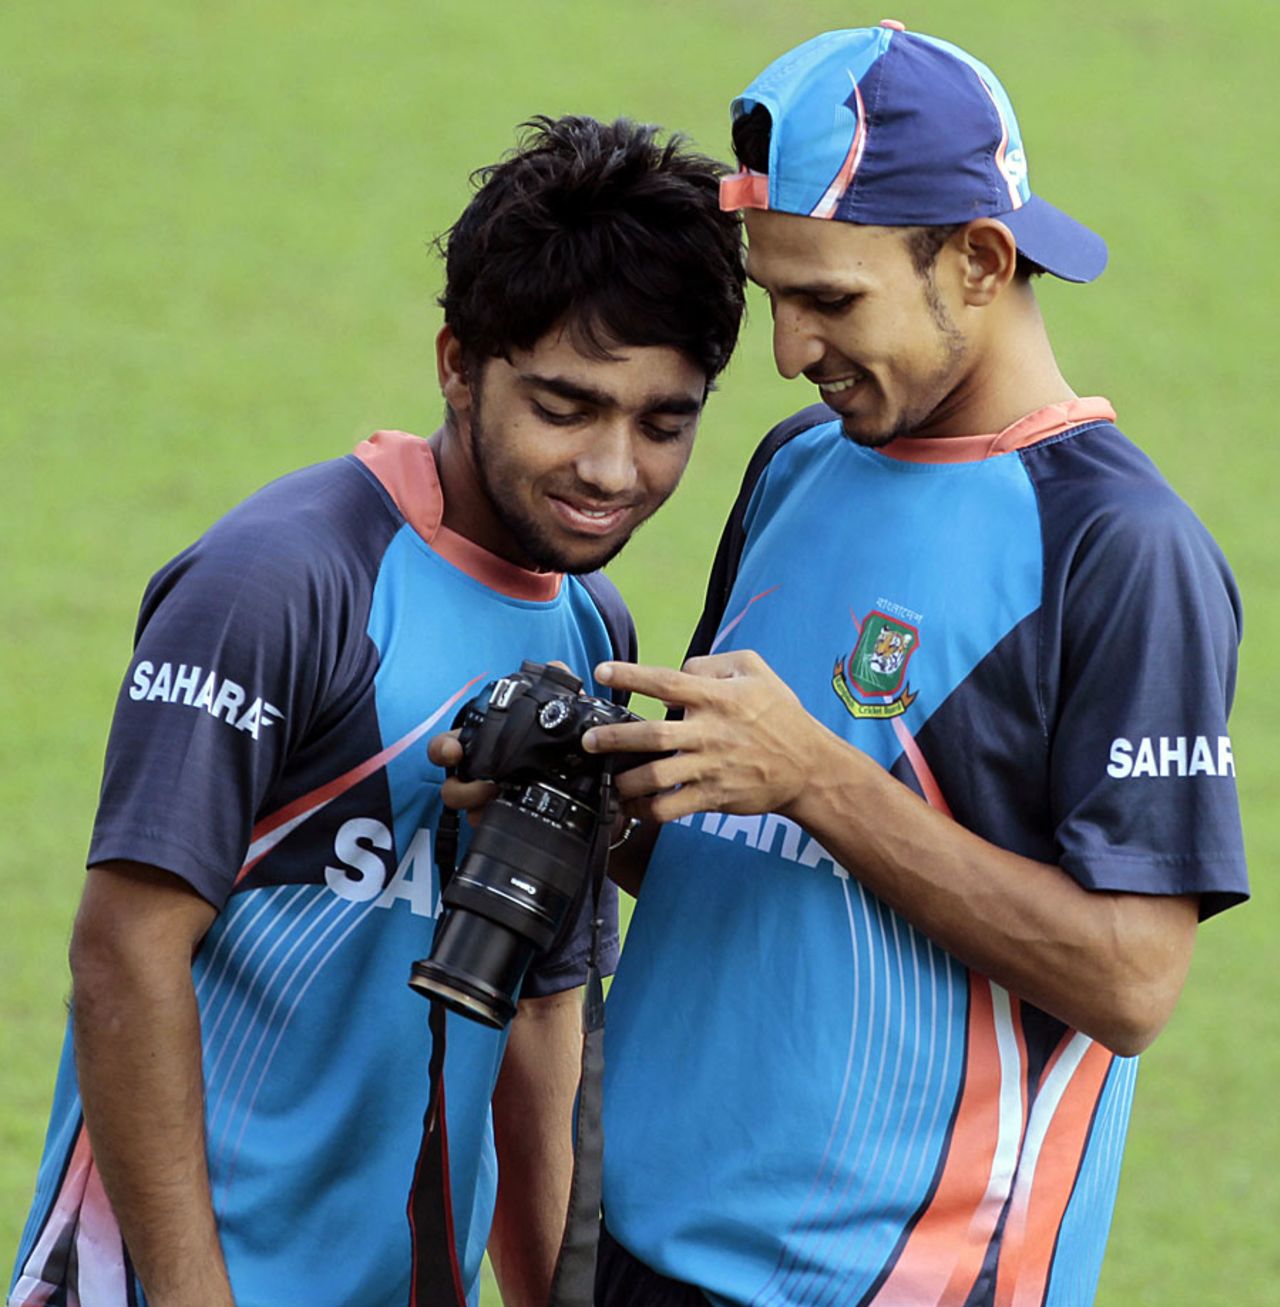 Mominul Haque and Nasir Hossain play around with a camera during training, Mirpur, October 28, 2013